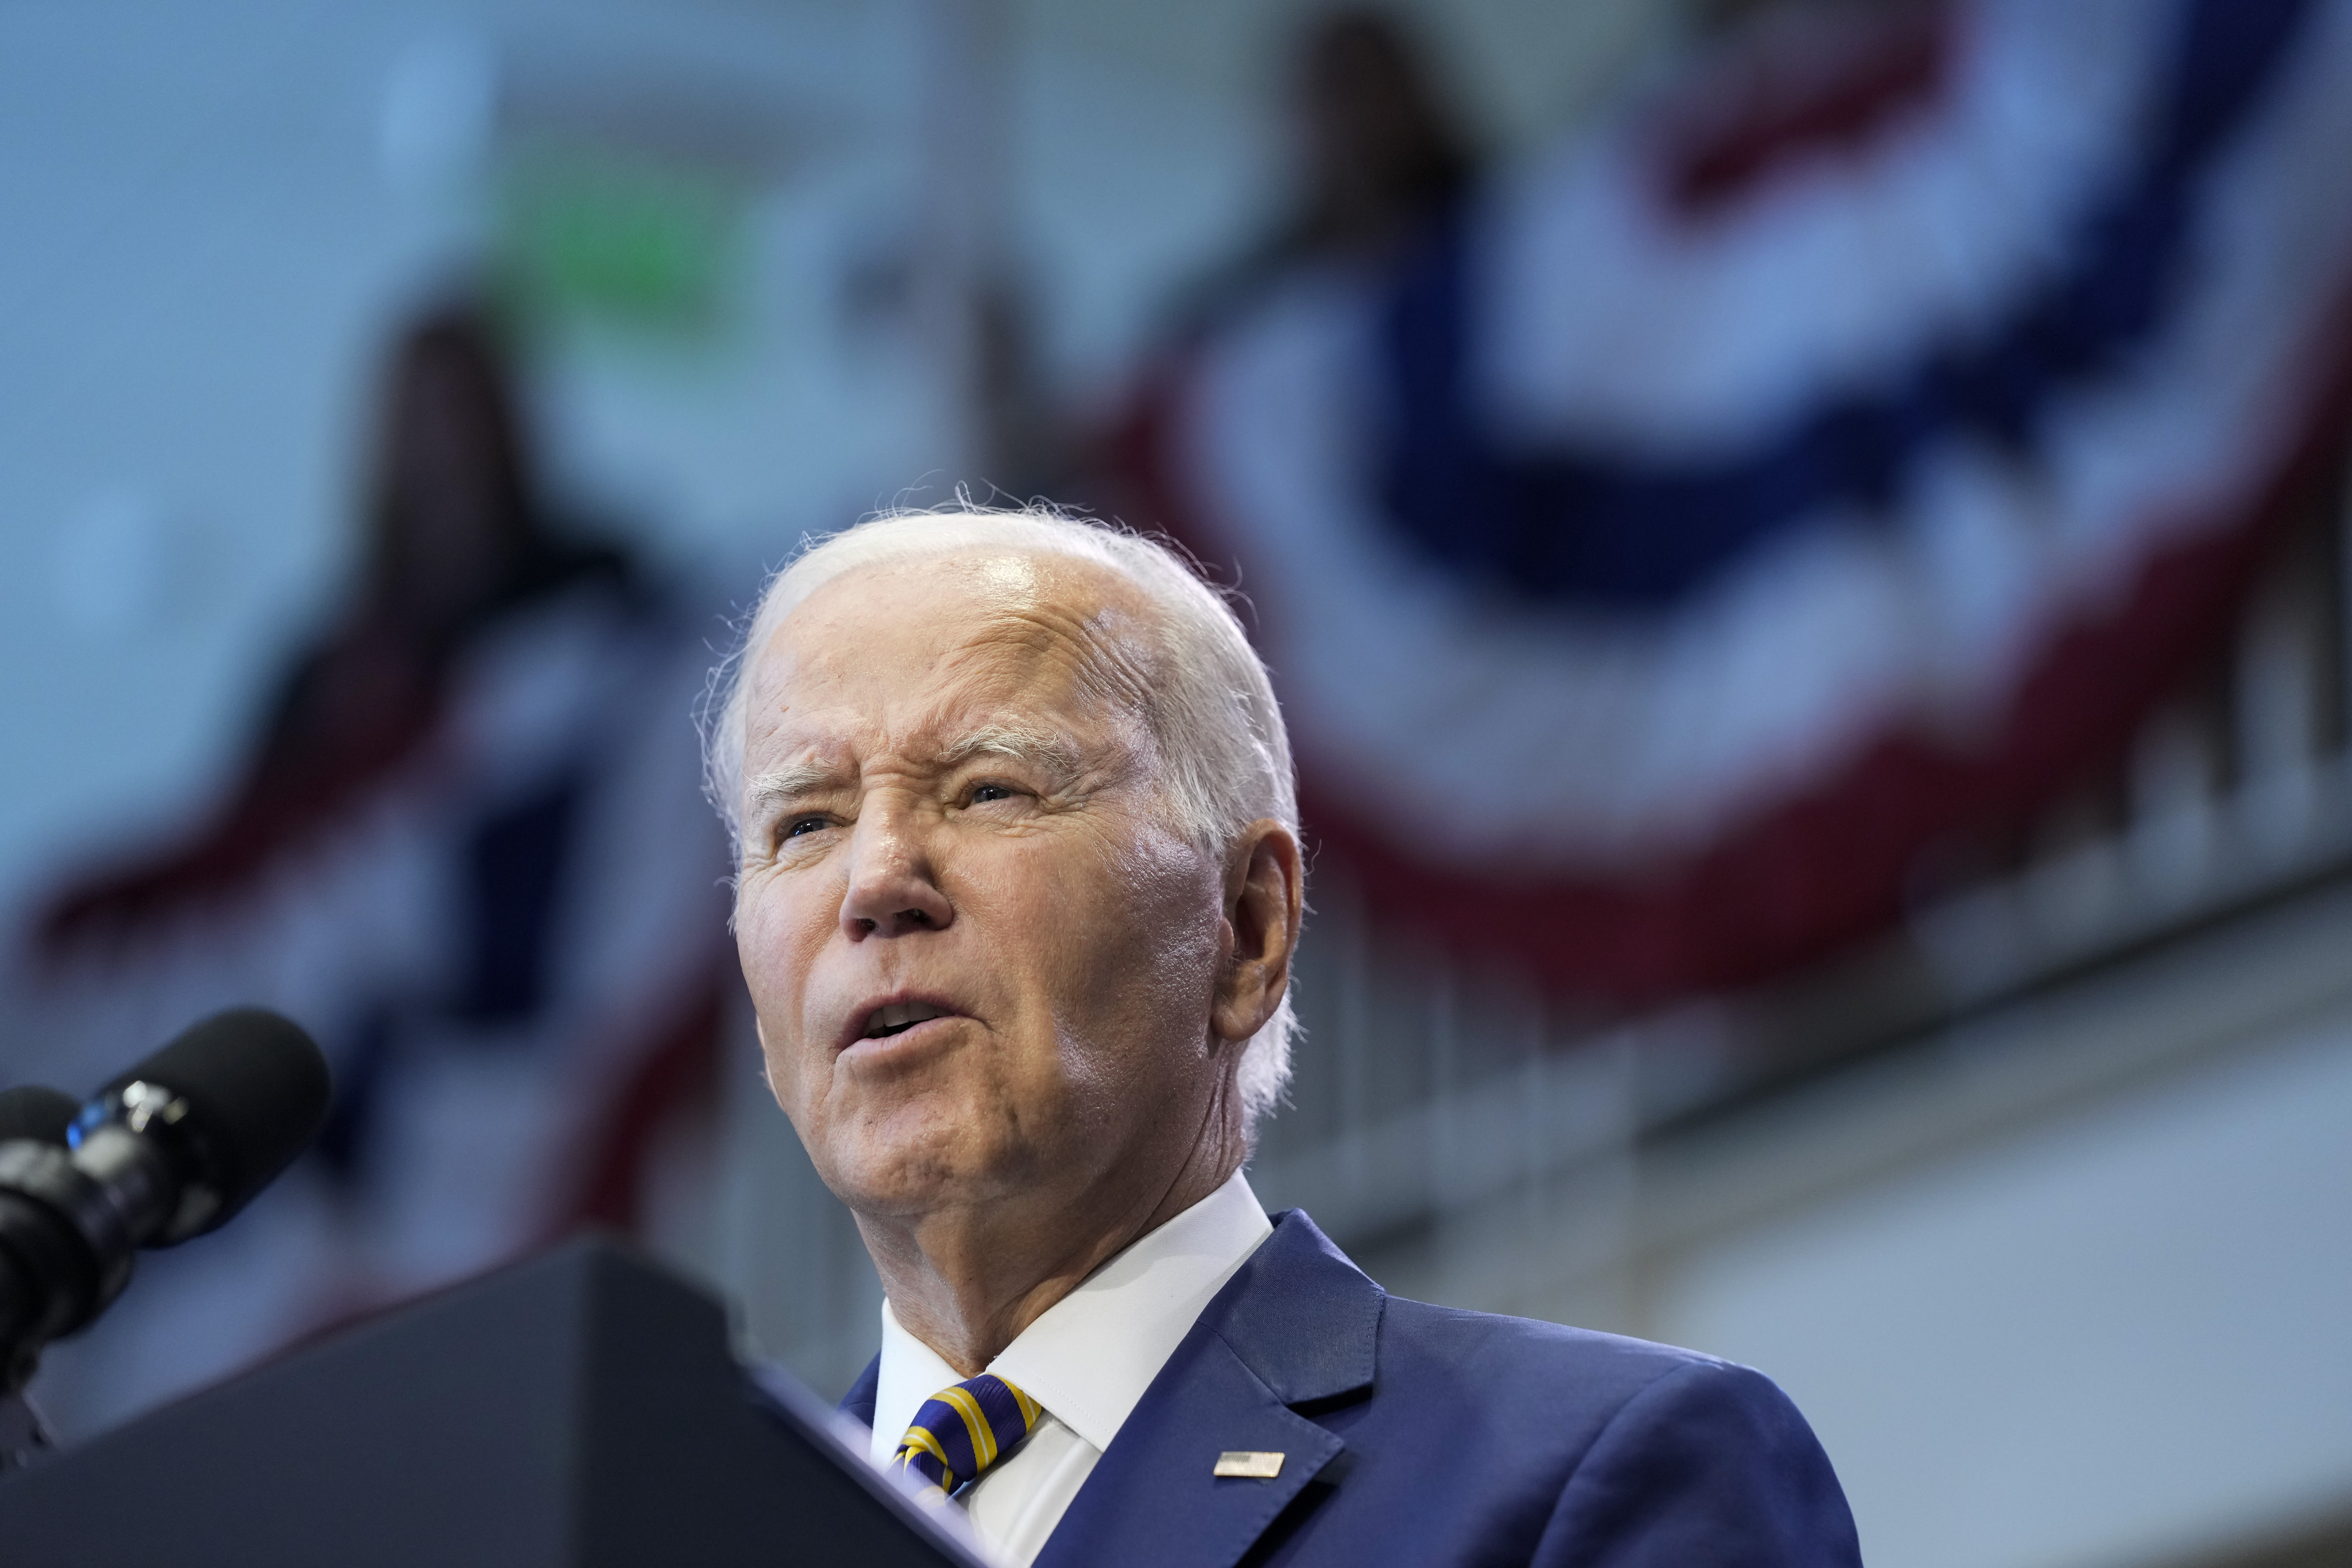 Pharmacies expand access to abortion pills under new Biden policy